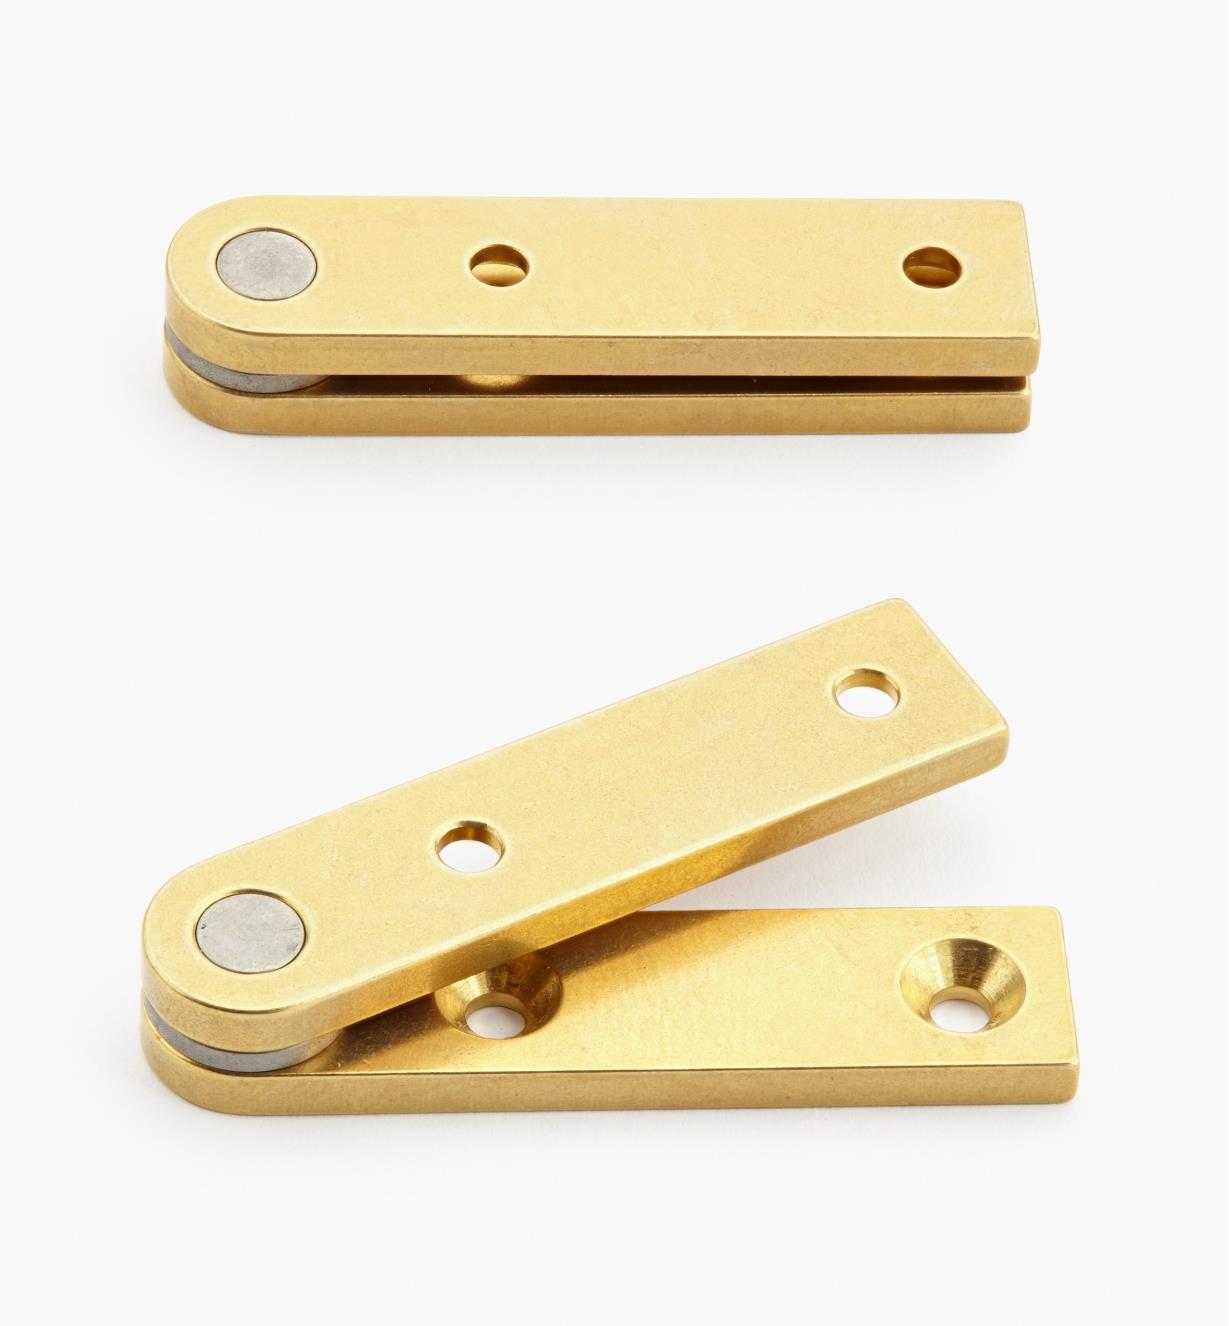 05H0107 - 7/16" x 1 7/8" x 1/8", Brass Straight Knife Hinges, pair